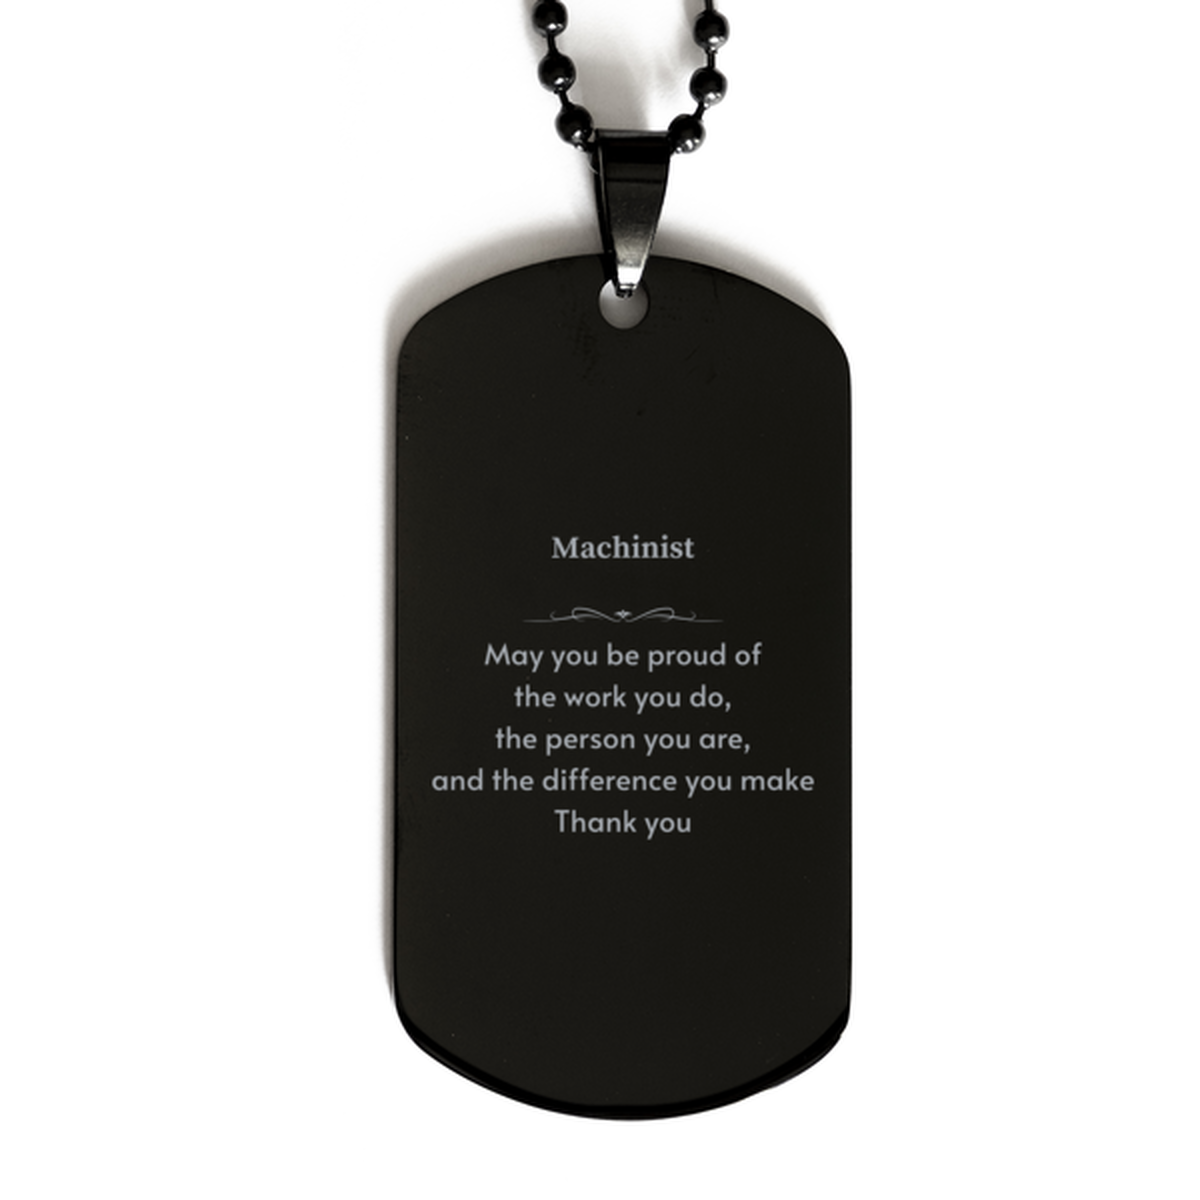 Heartwarming Black Dog Tag Retirement Coworkers Gifts for Machinist, Machinist May You be proud of the work you do, the person you are Gifts for Boss Men Women Friends